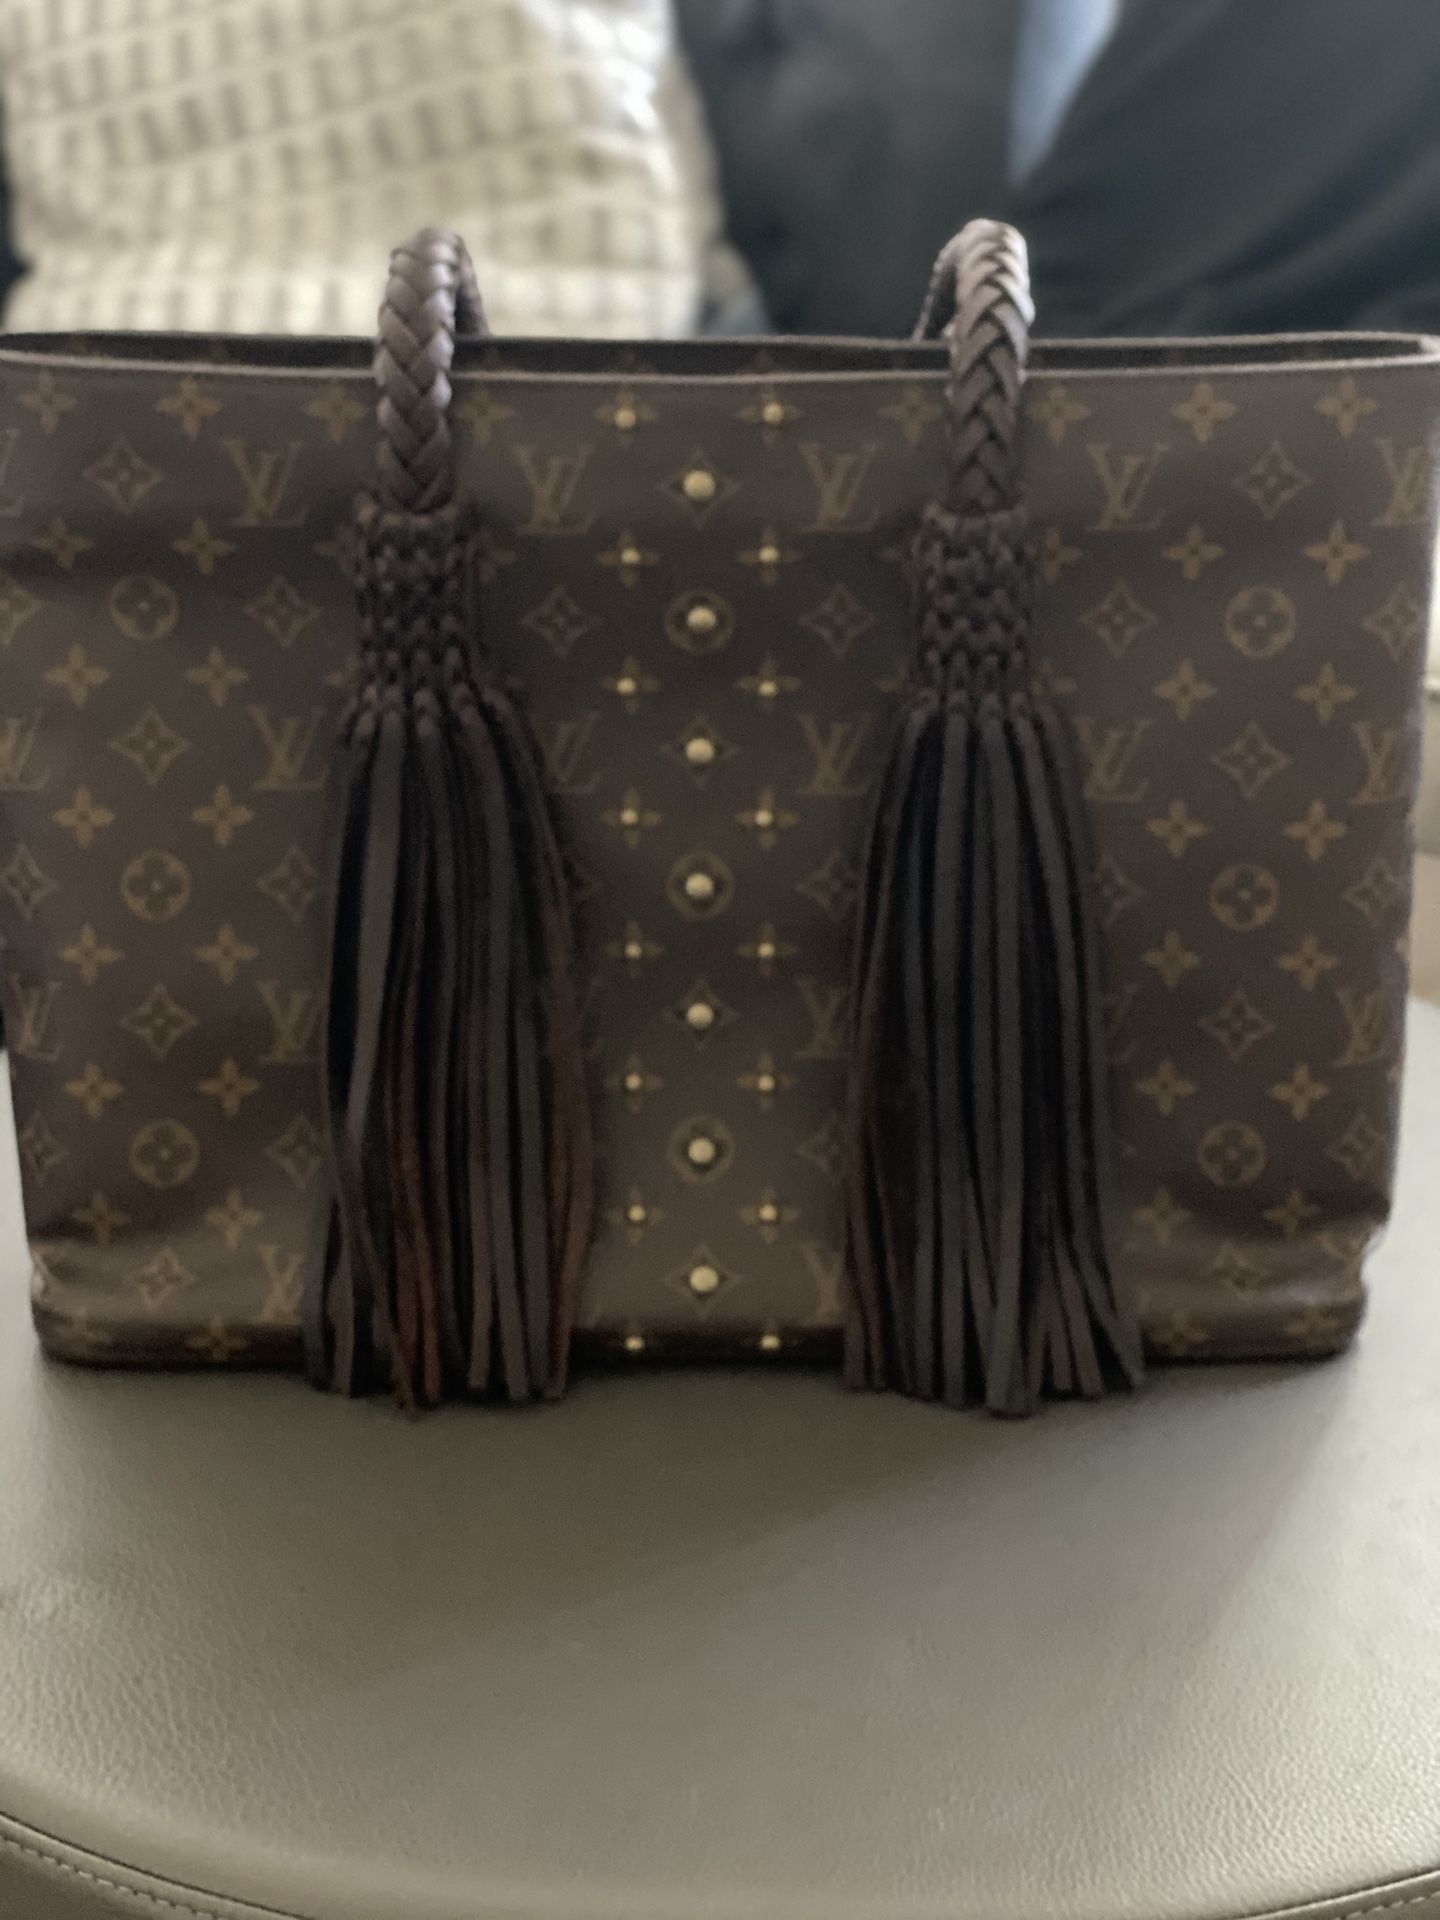 Vintage Boho Louis Vuitton Tote for Sale in West Hollywood, CA - OfferUp